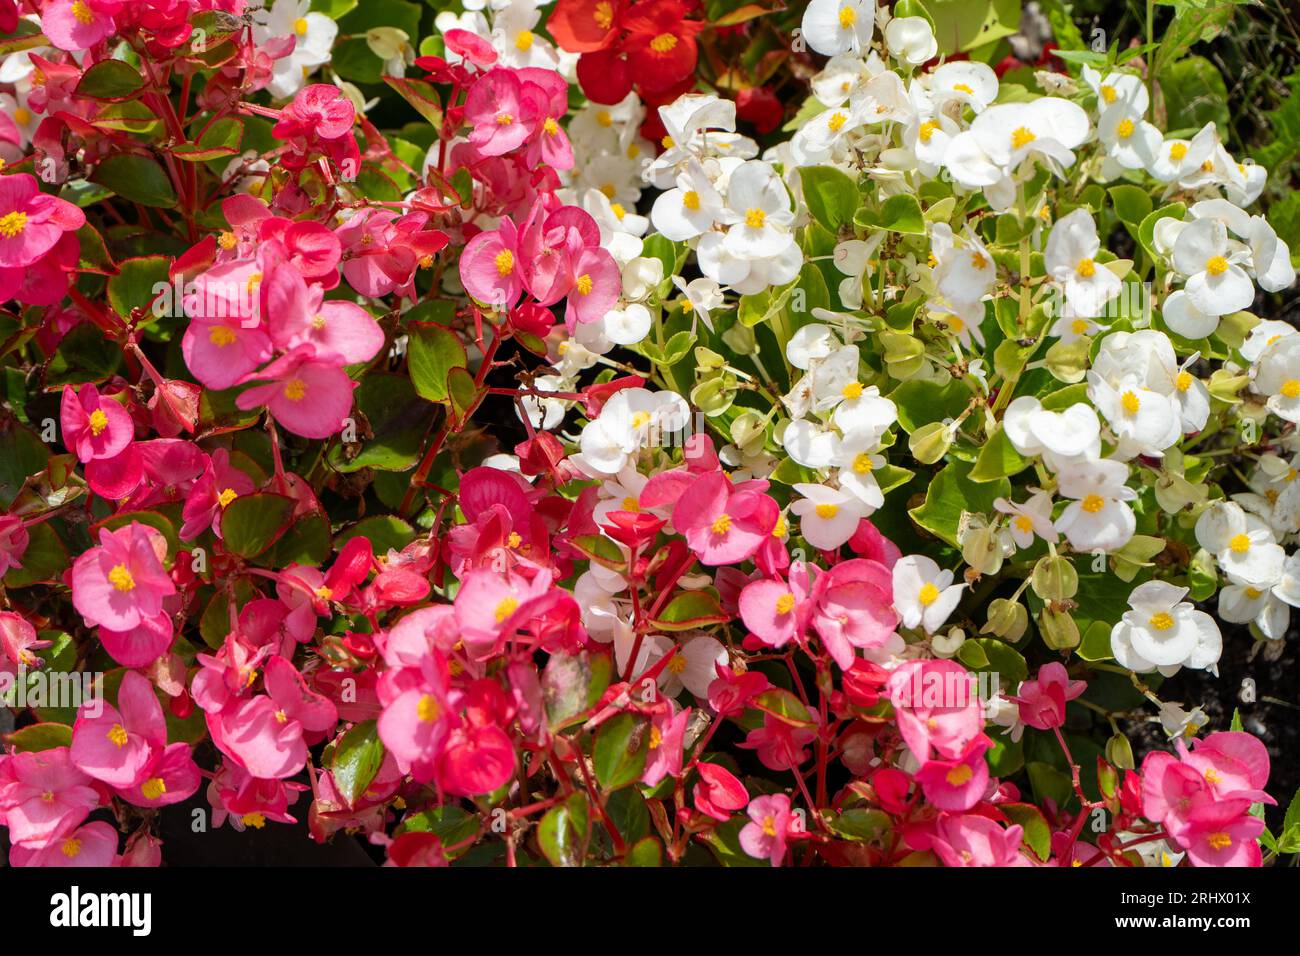 Multi-colored begonias on a street flower bed. Red, pink and white begonia. Flower arrangement in the garden. Garden landscape design. Grow flowers outside. Flowering in summer. Simple plants tuberous Stock Photo